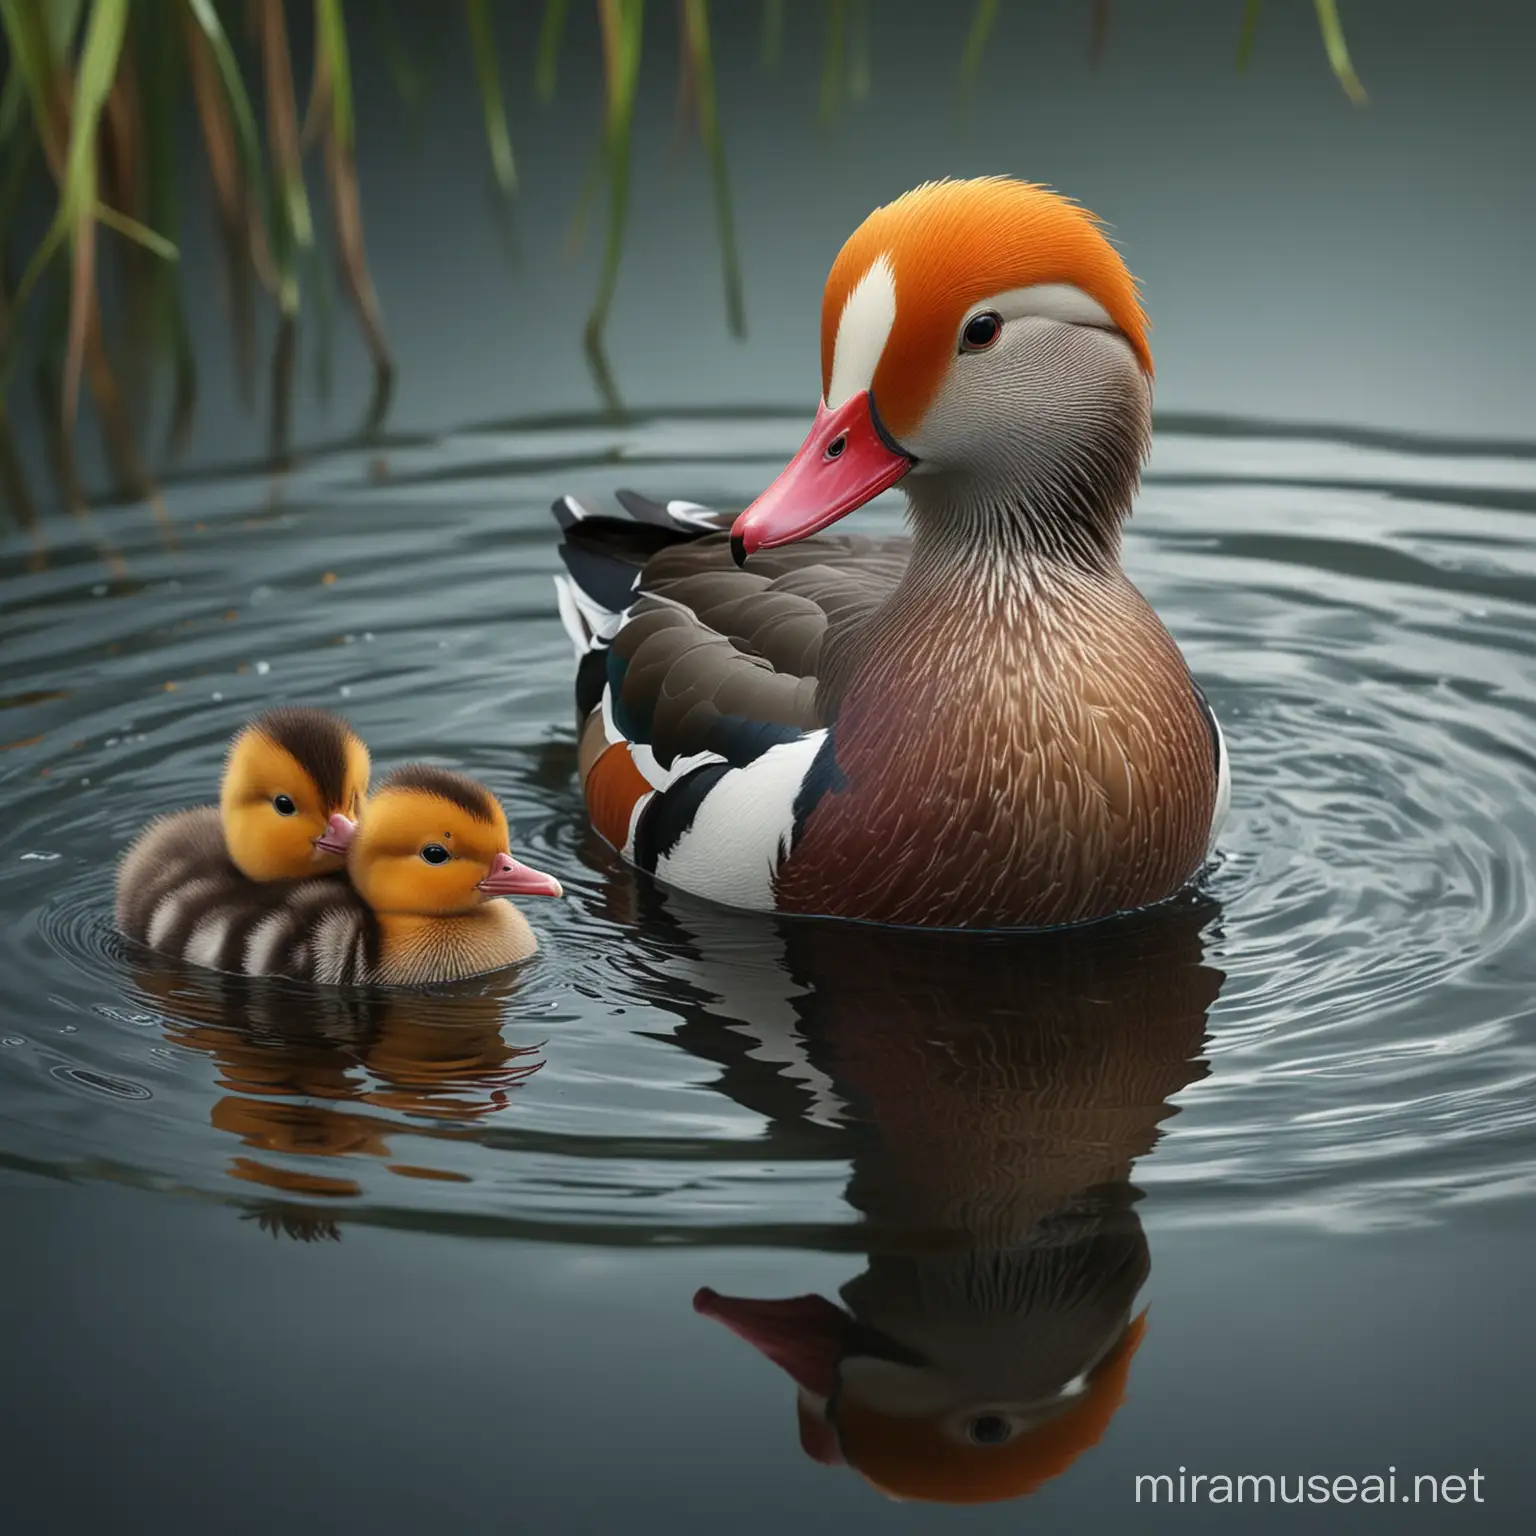 Create an ultra-photorealistic image that captures the essence of growth and potential. It portrays a mandarin duck chick looking into the water and seeing its reflection as an adult male mandarin duck Aix galericulata in breeding plumage. This powerful visual metaphor represents one character at two different stages of life, all within a single reflection, C4D rendering, ultra HD, master works,  –AR 16:9 --niji 6 –style raw